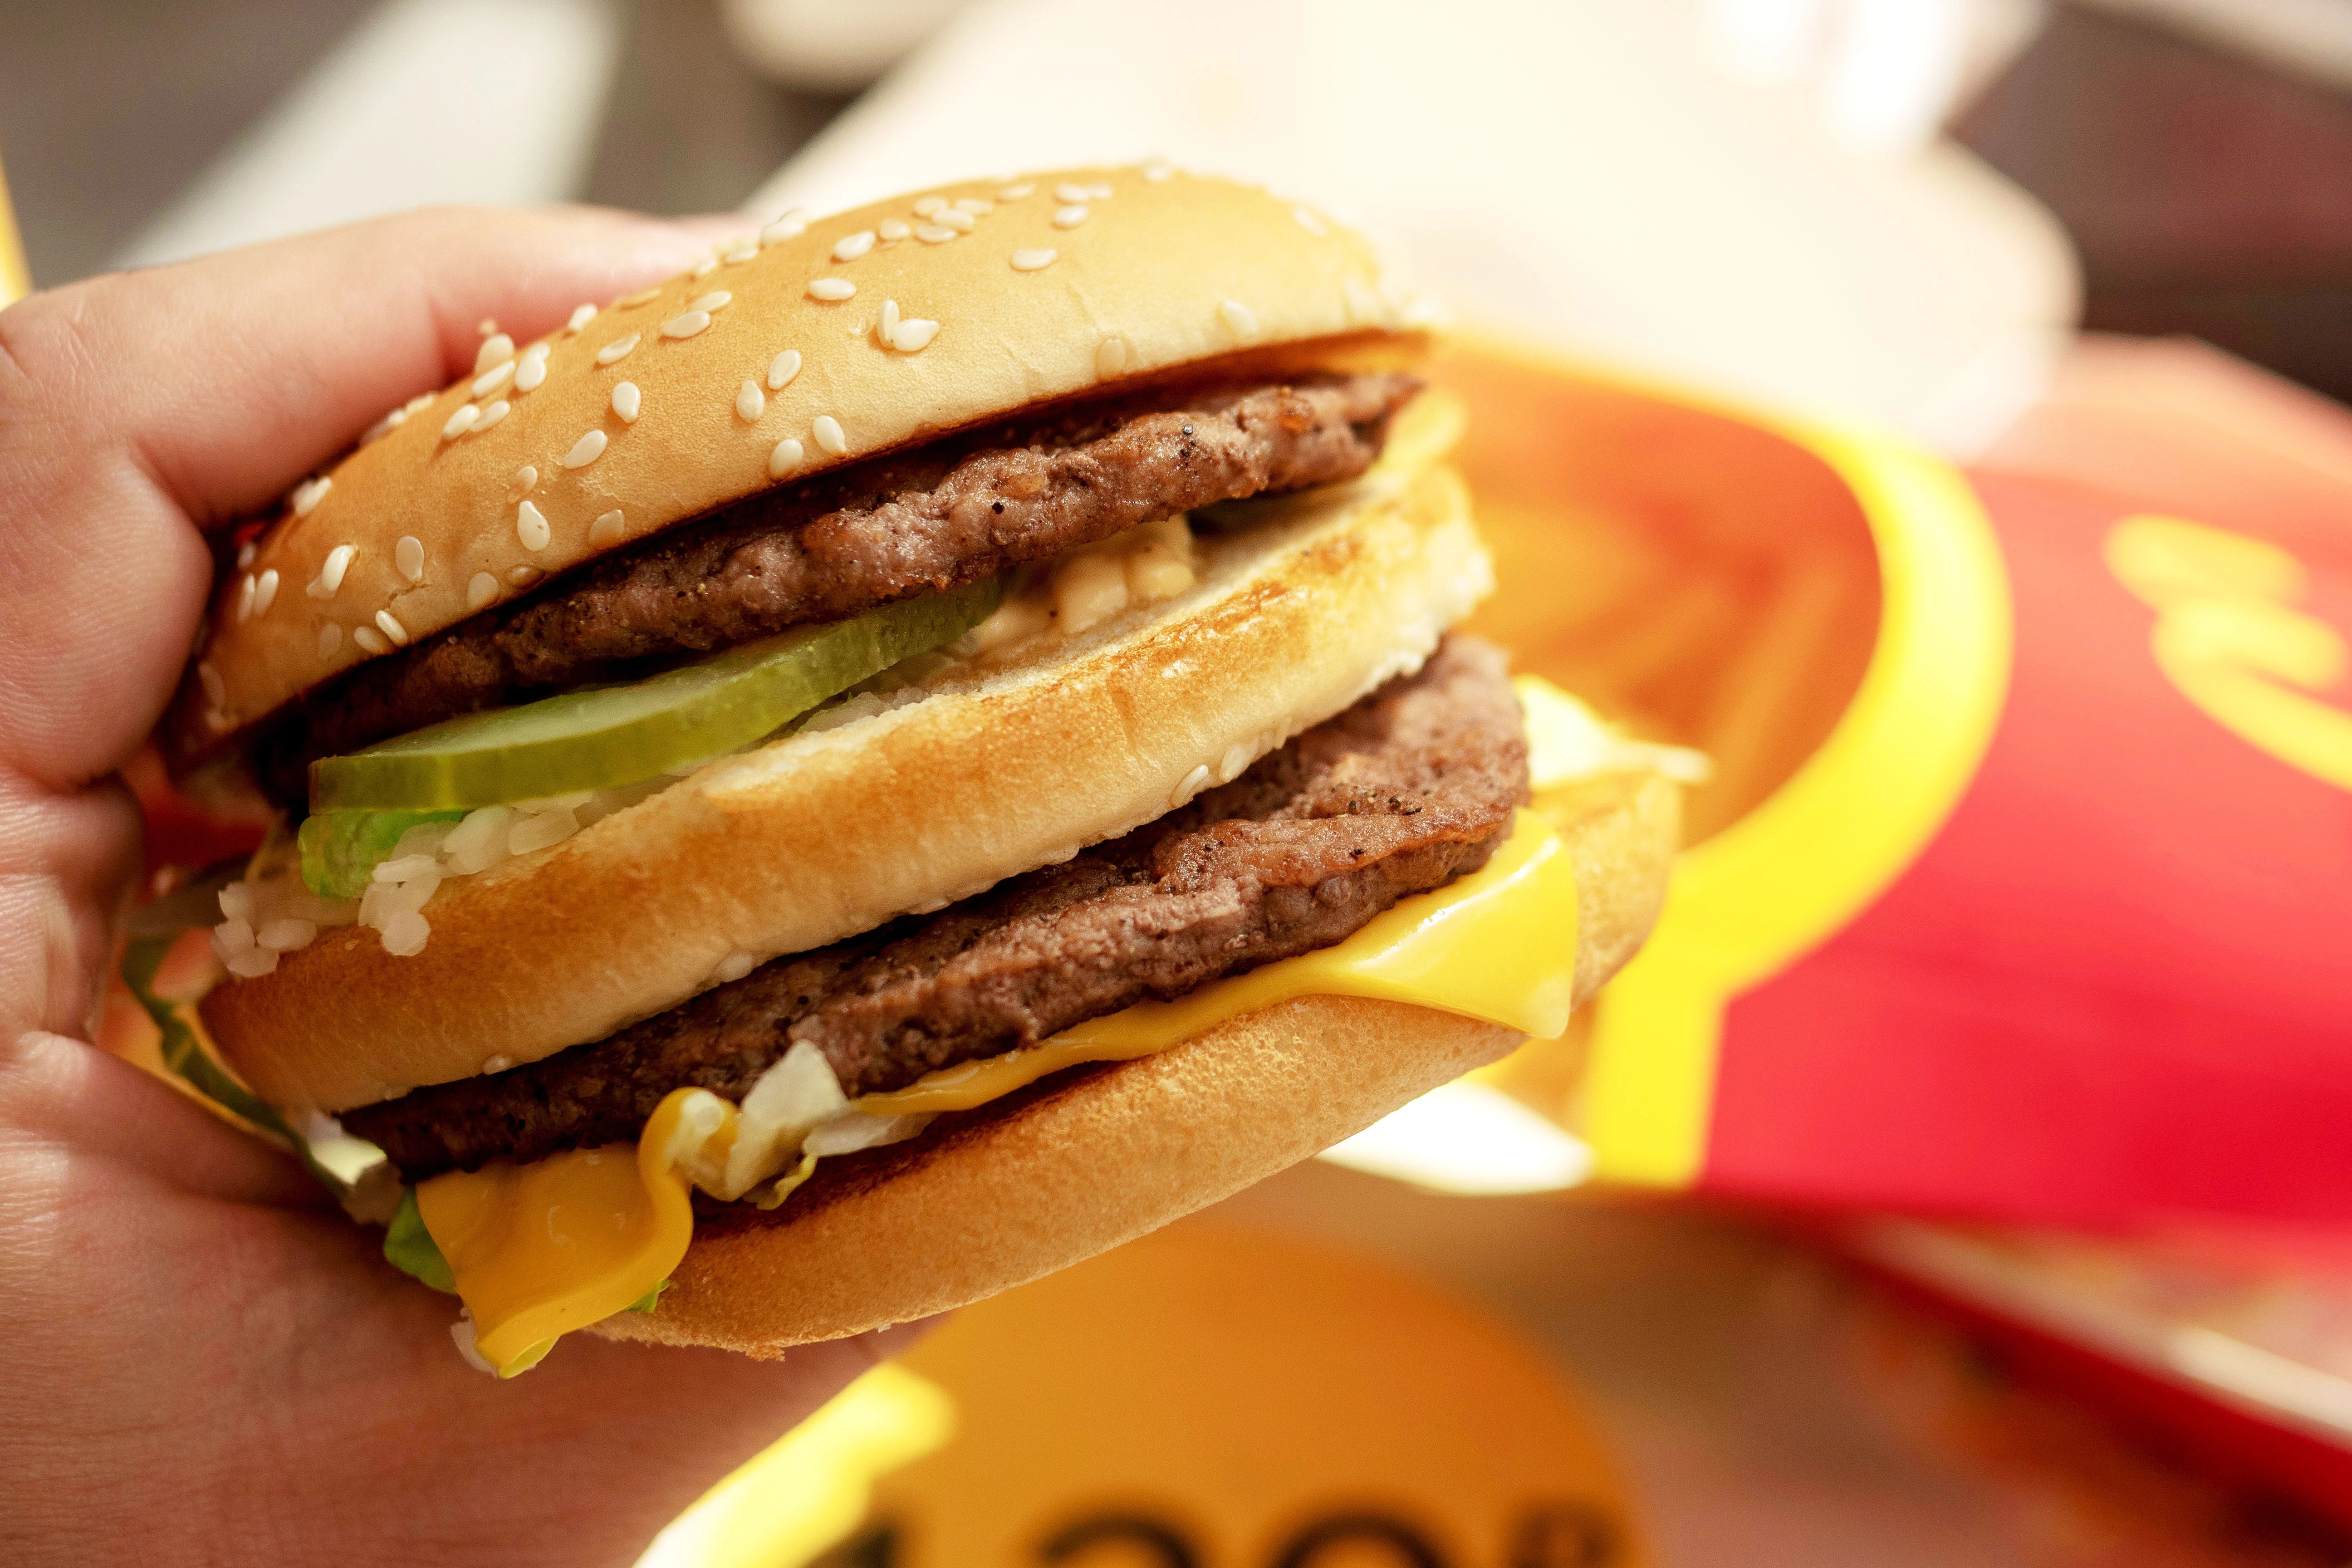 help mcdonalds sellimg big mac buy one get one for 1 cent